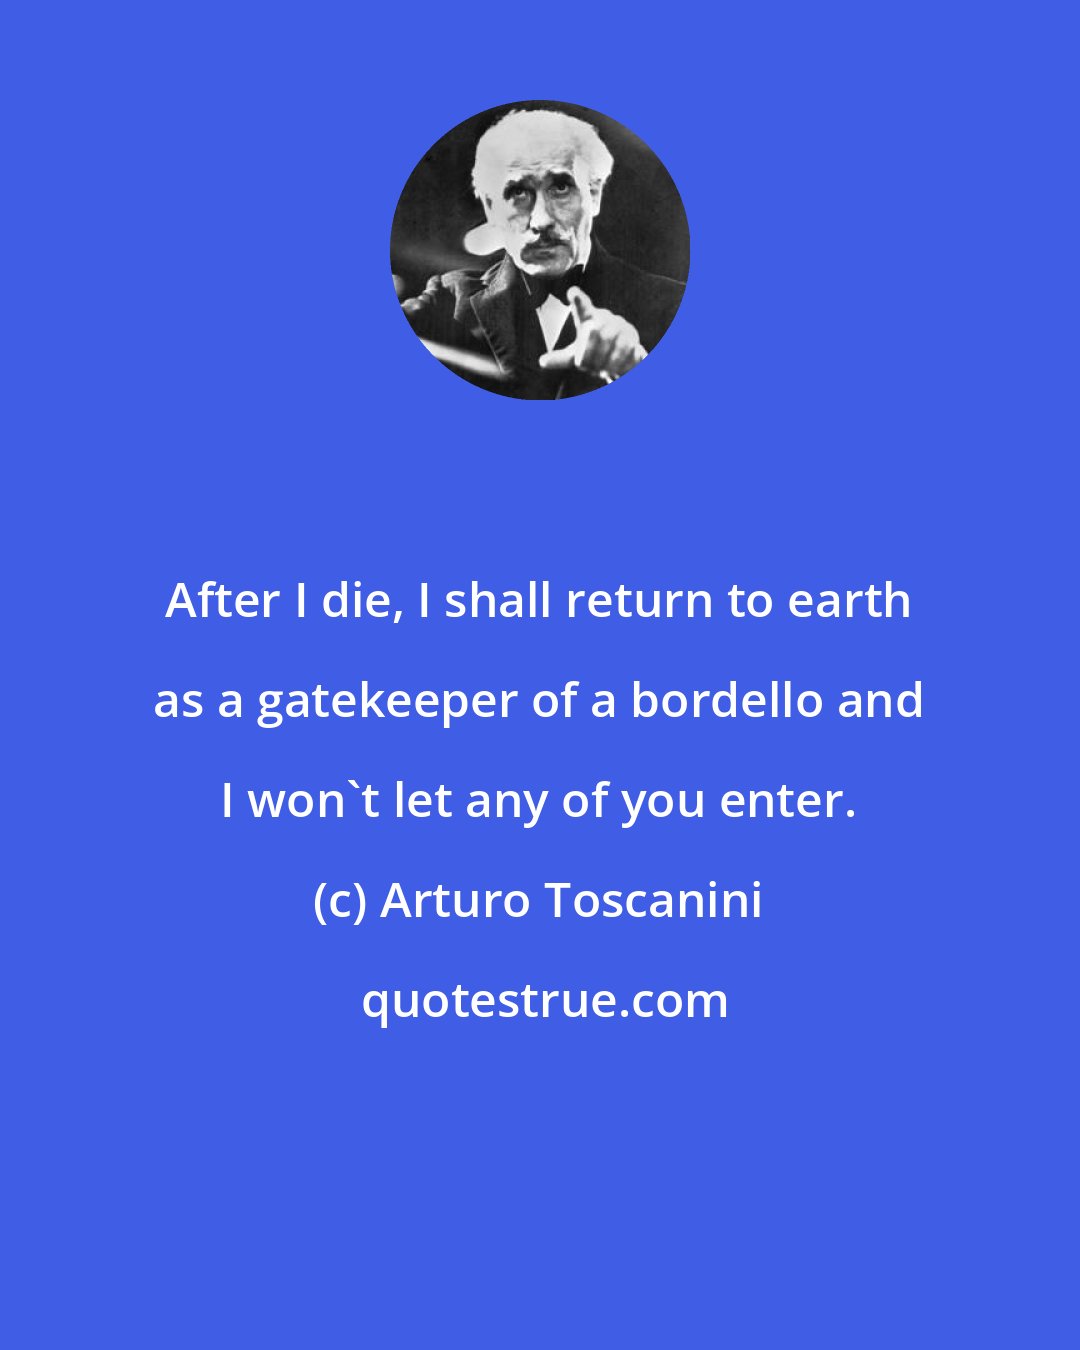 Arturo Toscanini: After I die, I shall return to earth as a gatekeeper of a bordello and I won't let any of you enter.